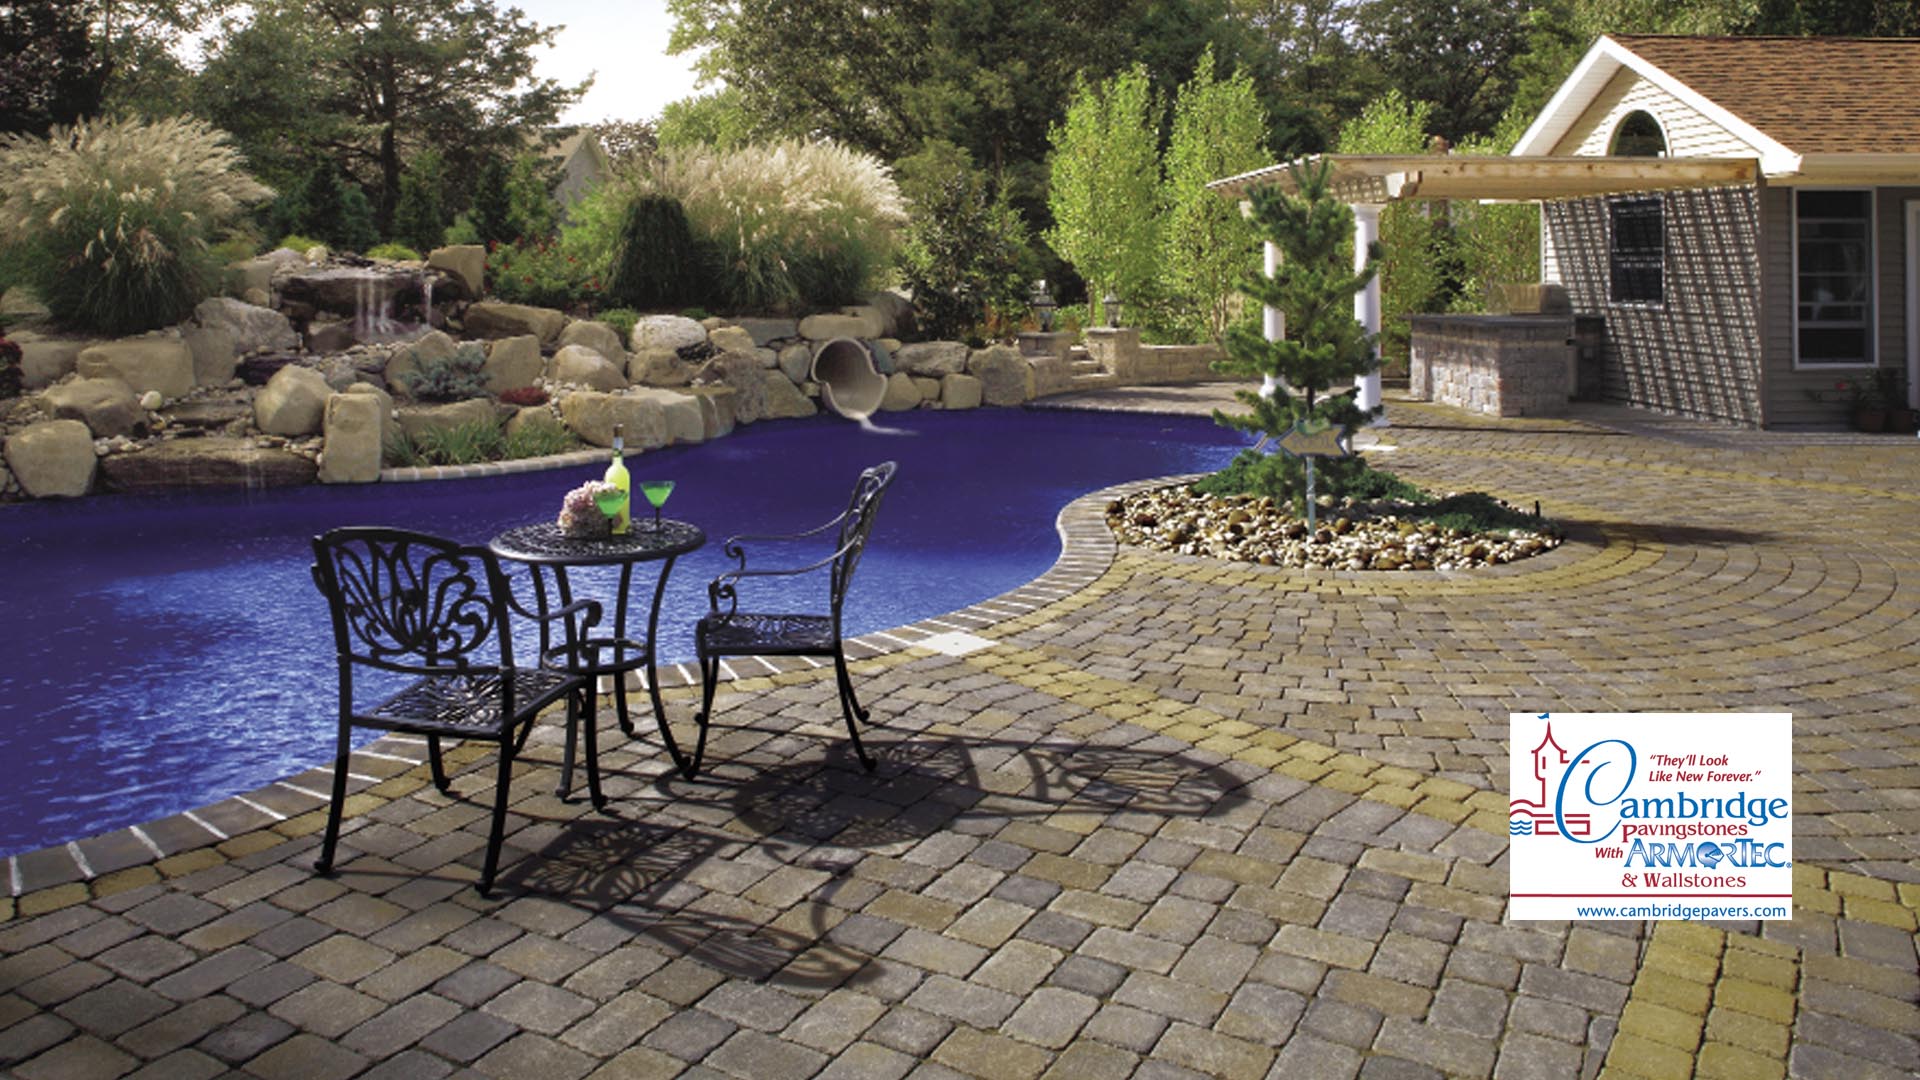 Brancato Landscaping Contractor Landscaping Company, Hardscape Service and Brick Paver Installation Services slide 3